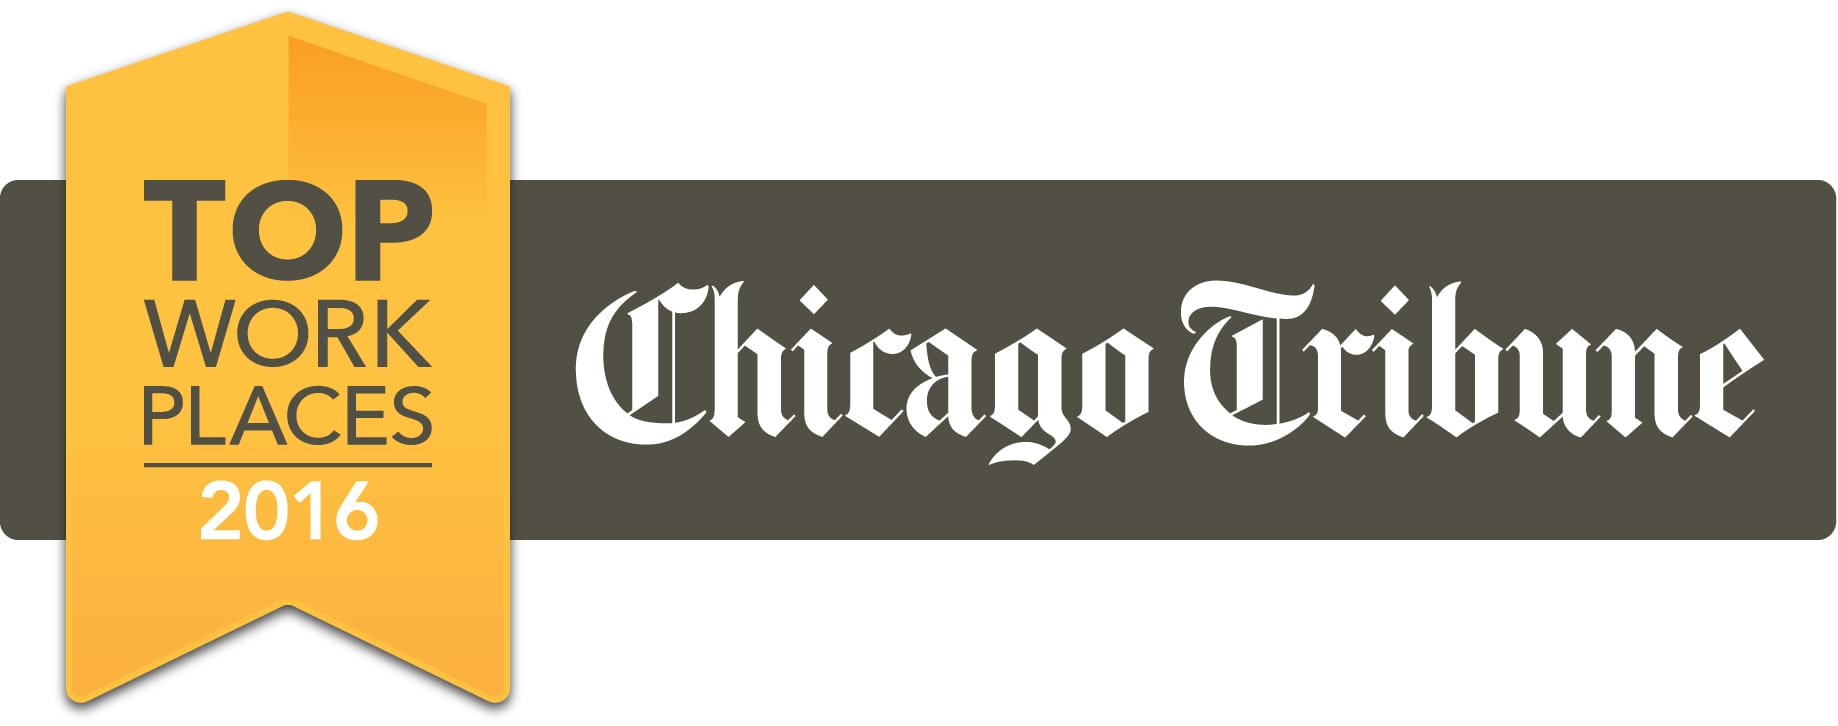 Chicago Tribune Names NAI Hiffman a Top Workplace for Fourth Consecutive Year